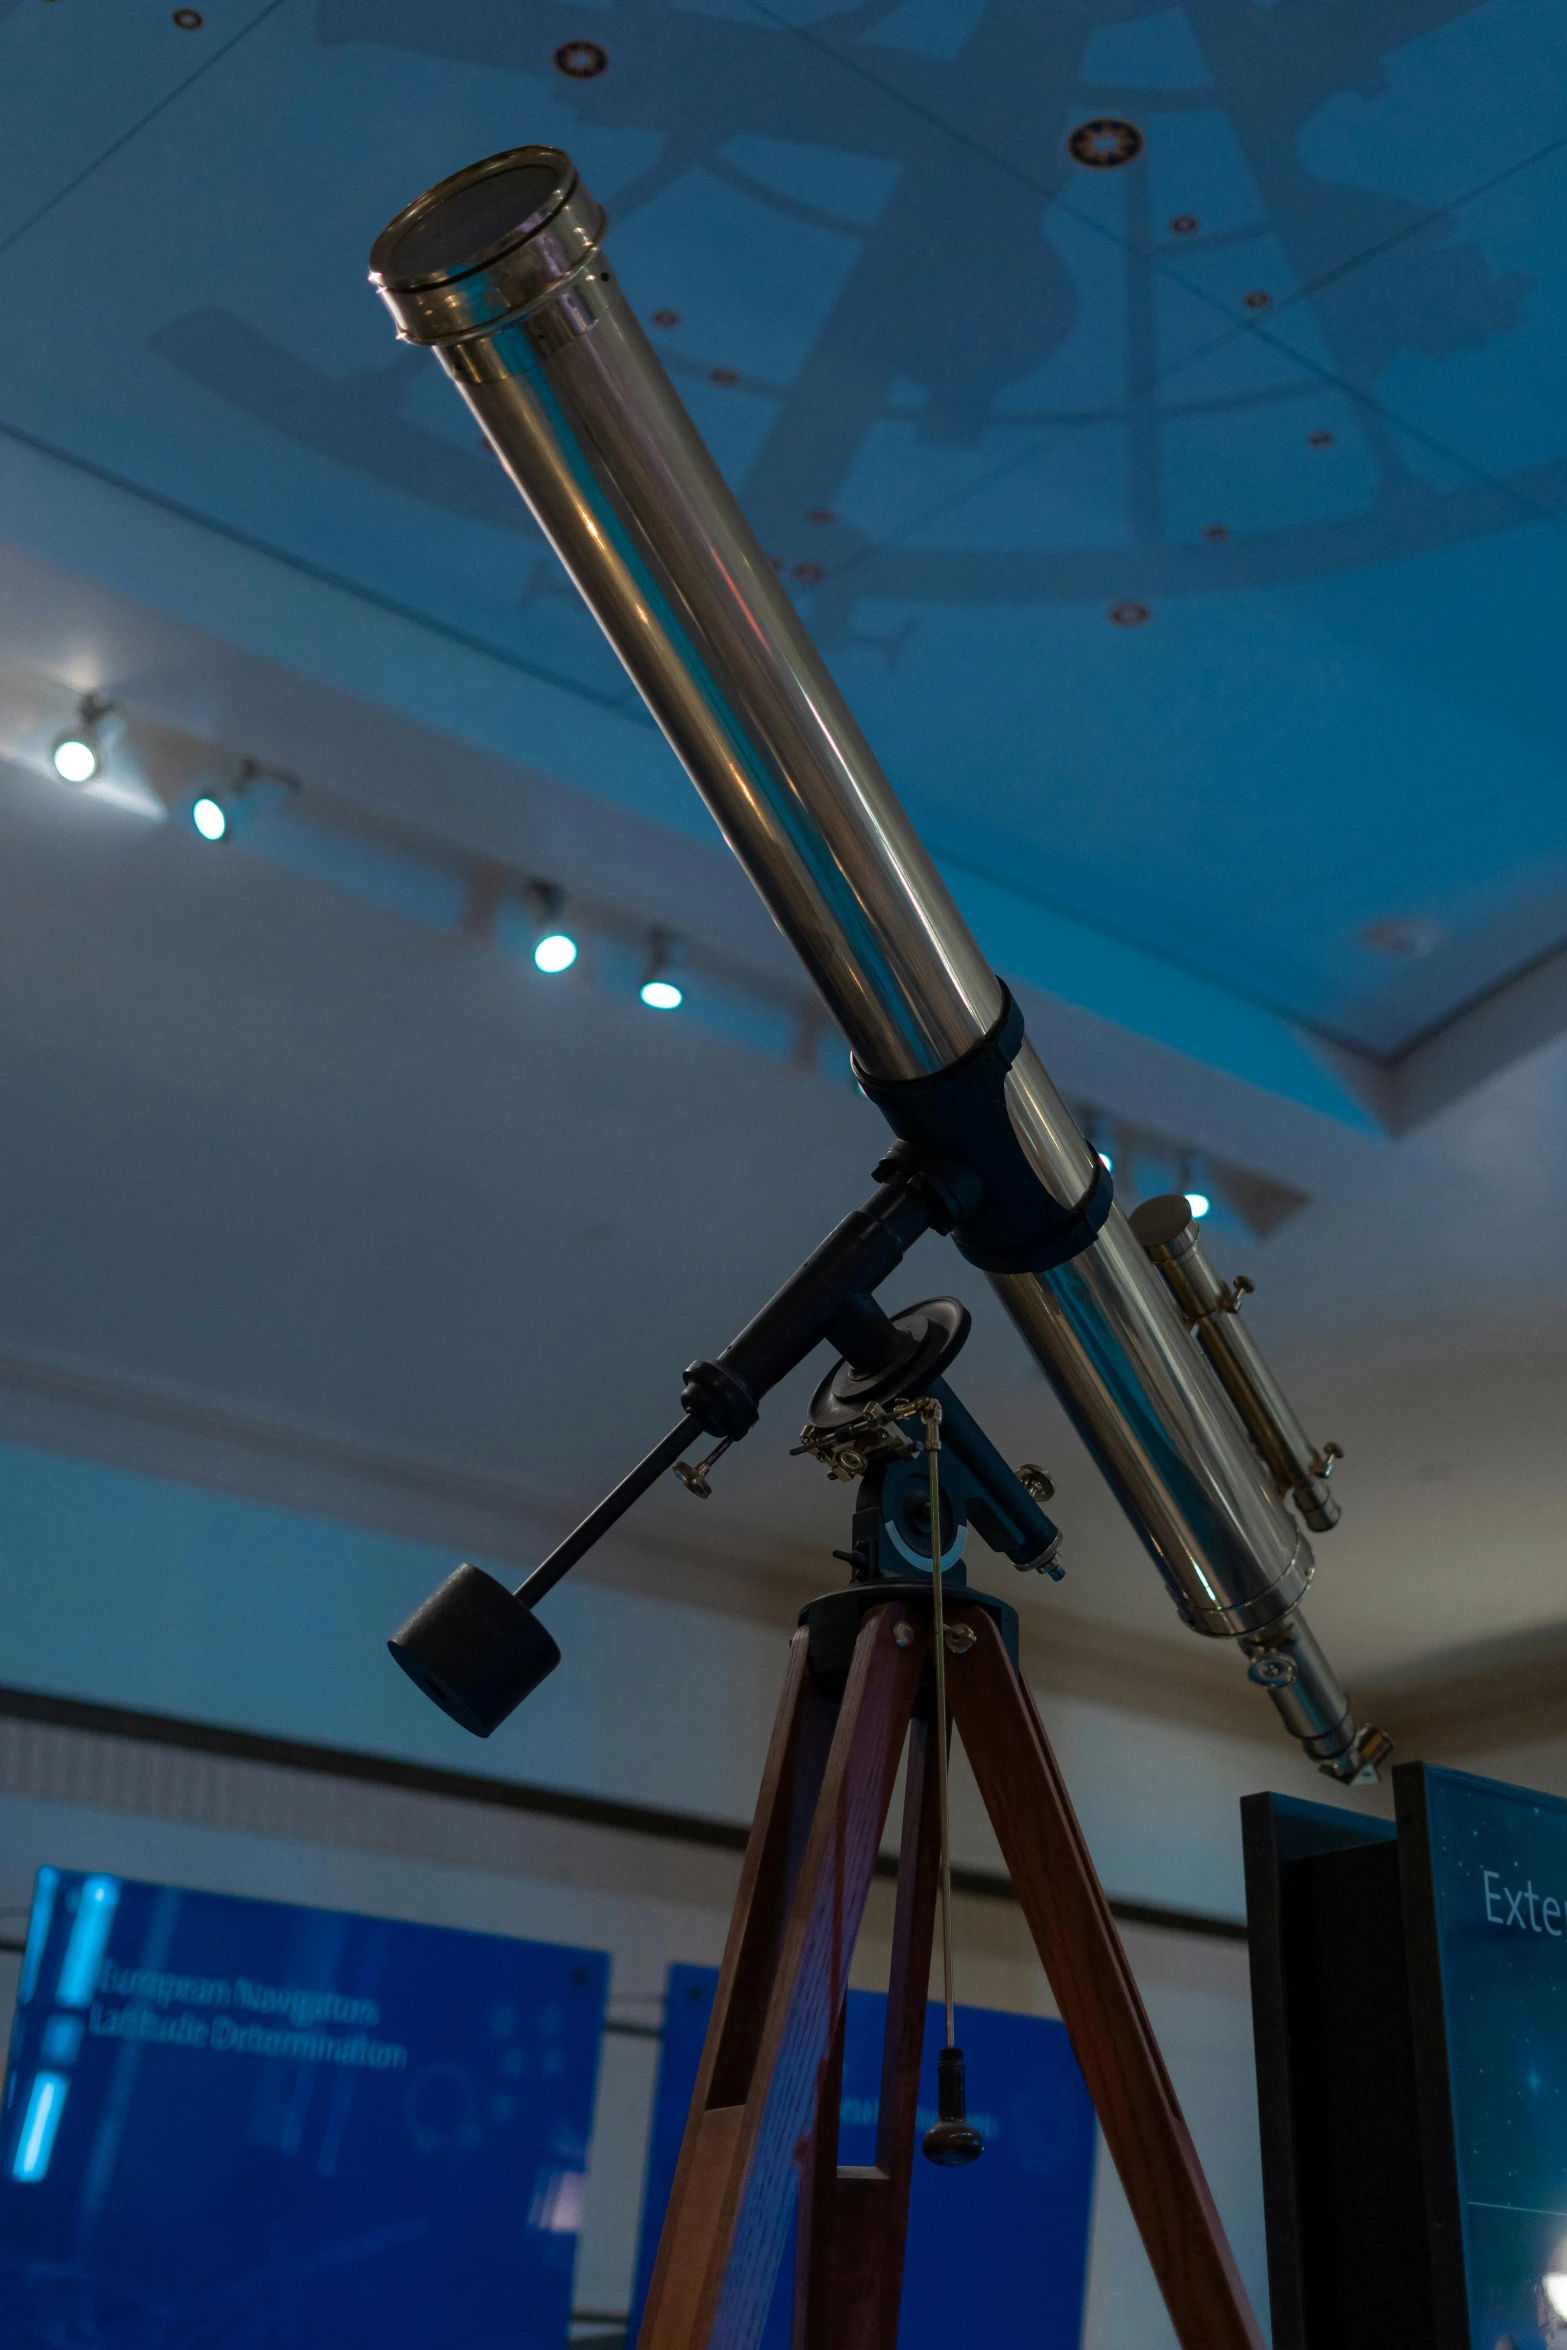 a telescope set up on a tripod in the middle of a room